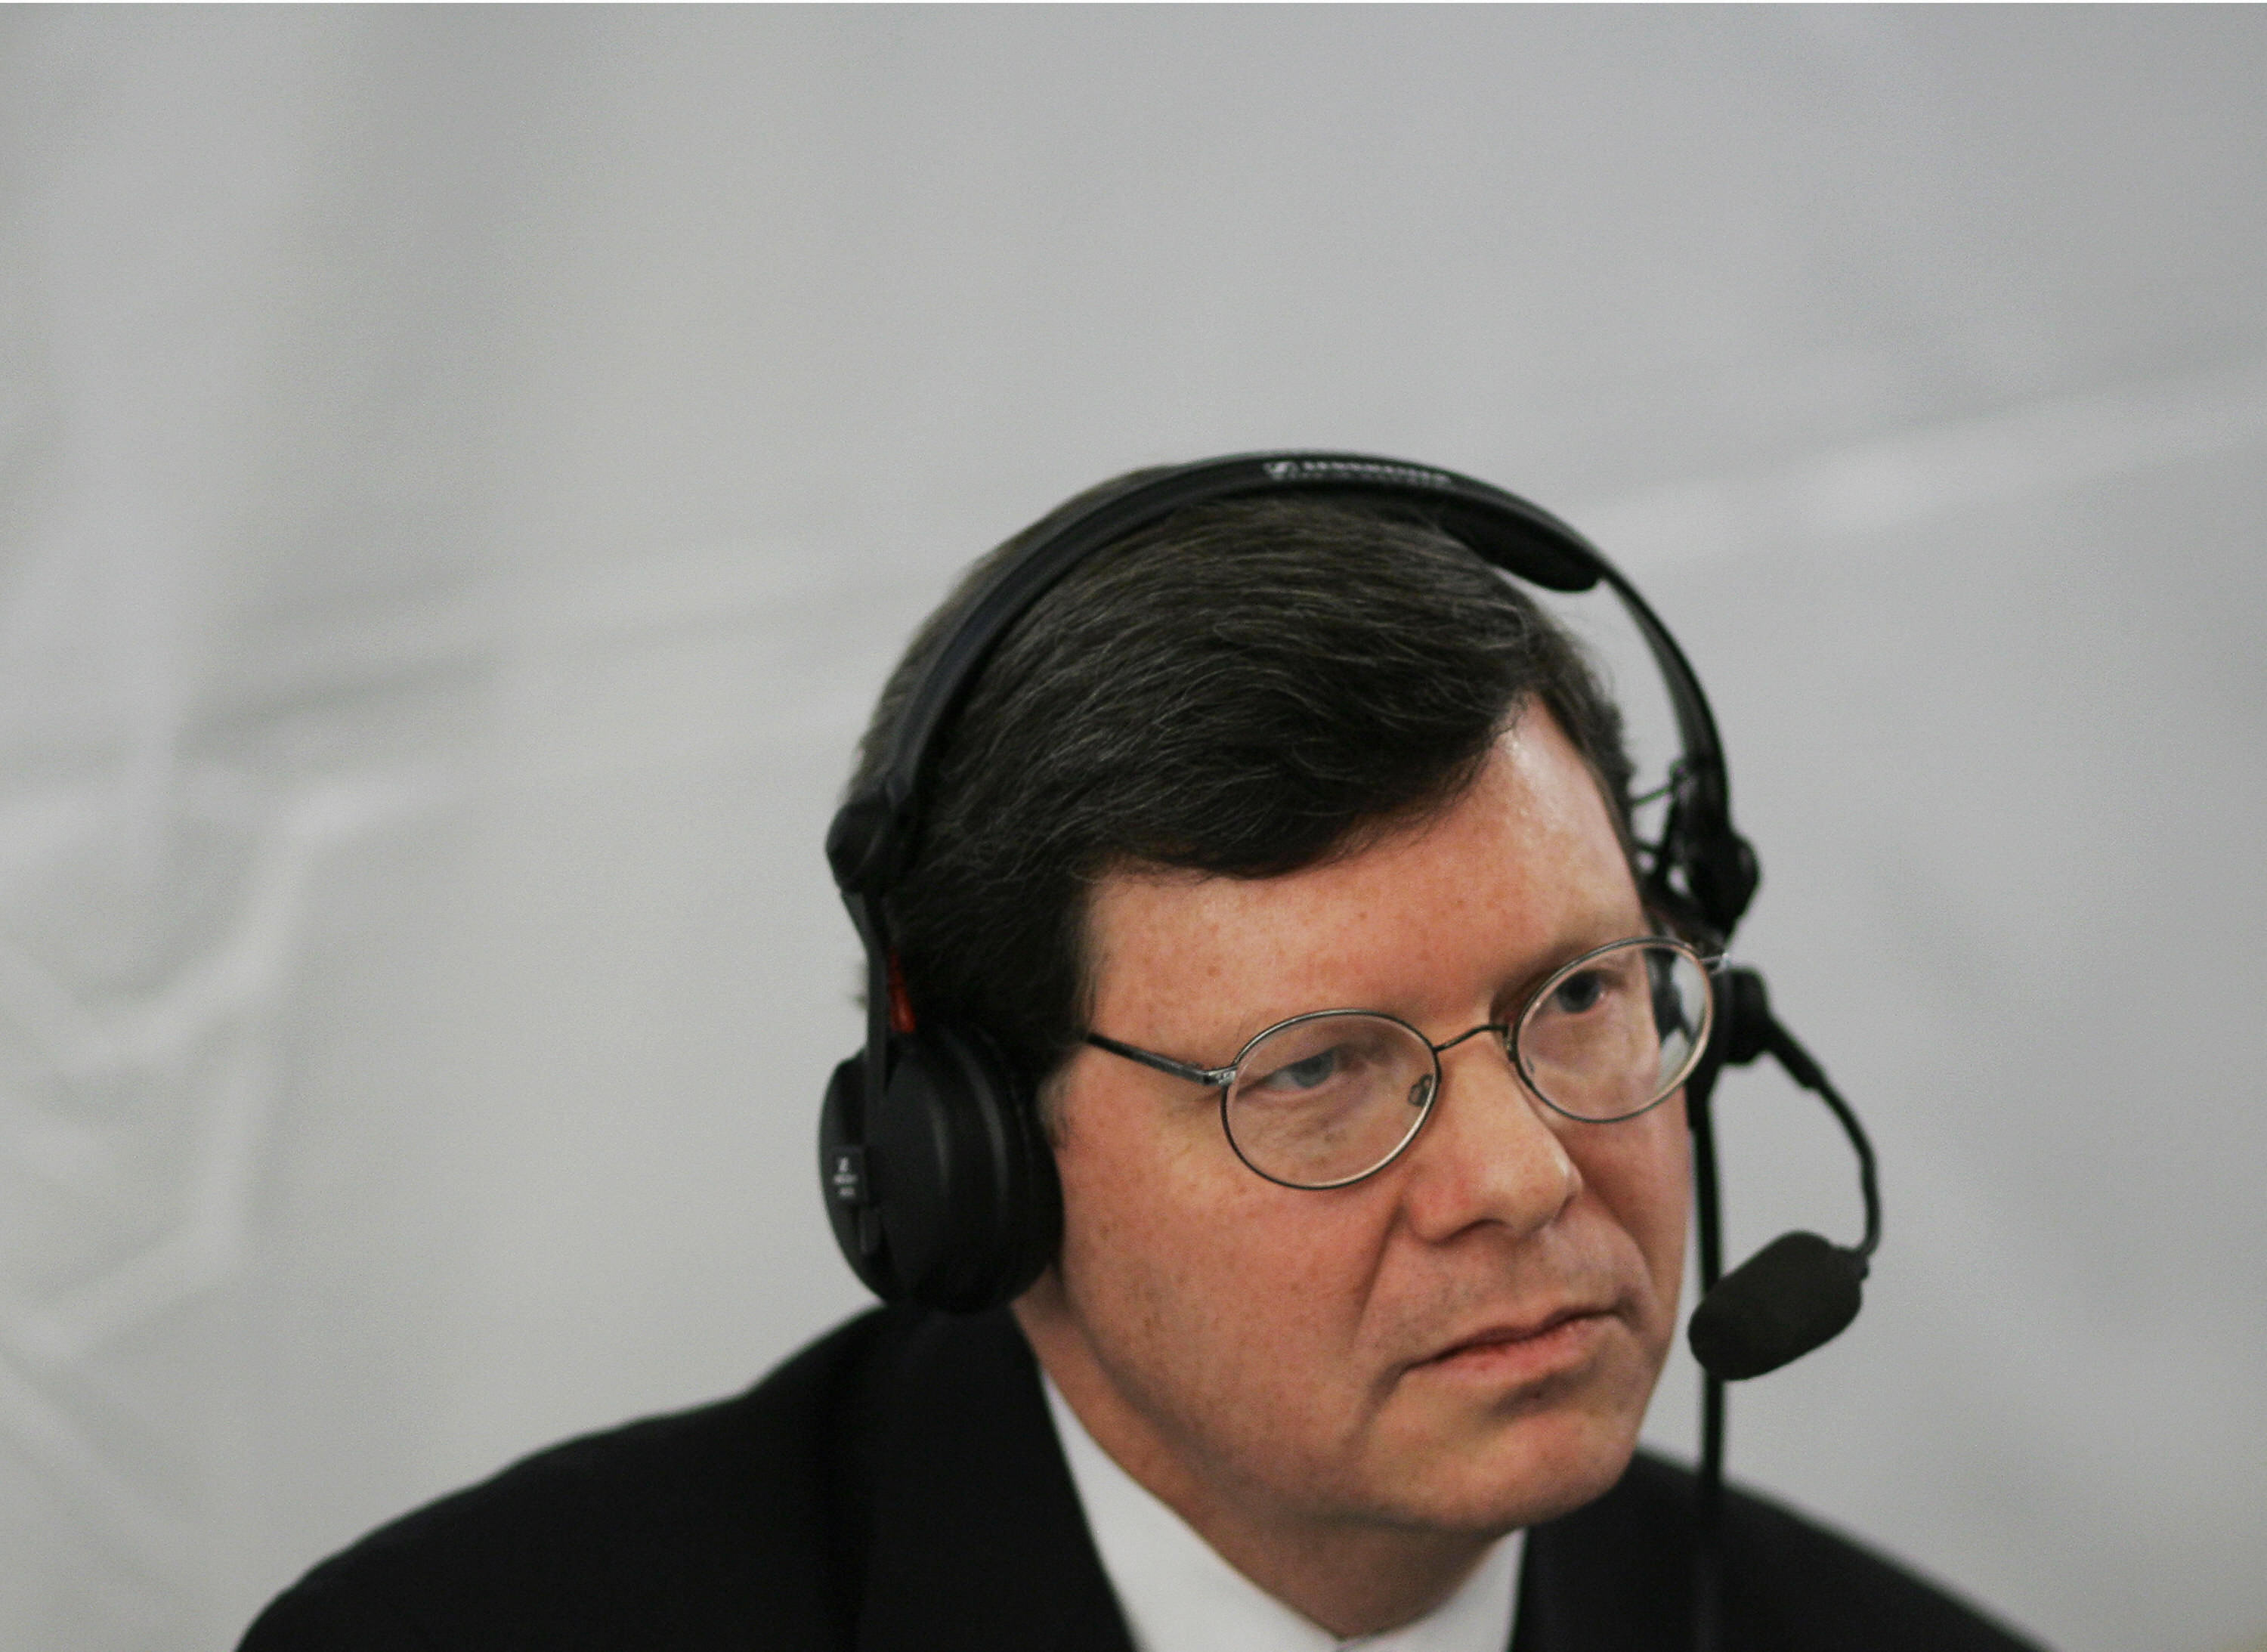 Charlie Sykes of WTMJ in Milwaukee, shown in during a show in 2006 at the White House. Photo: Mandel Ngan/AFP/Getty Images/File.